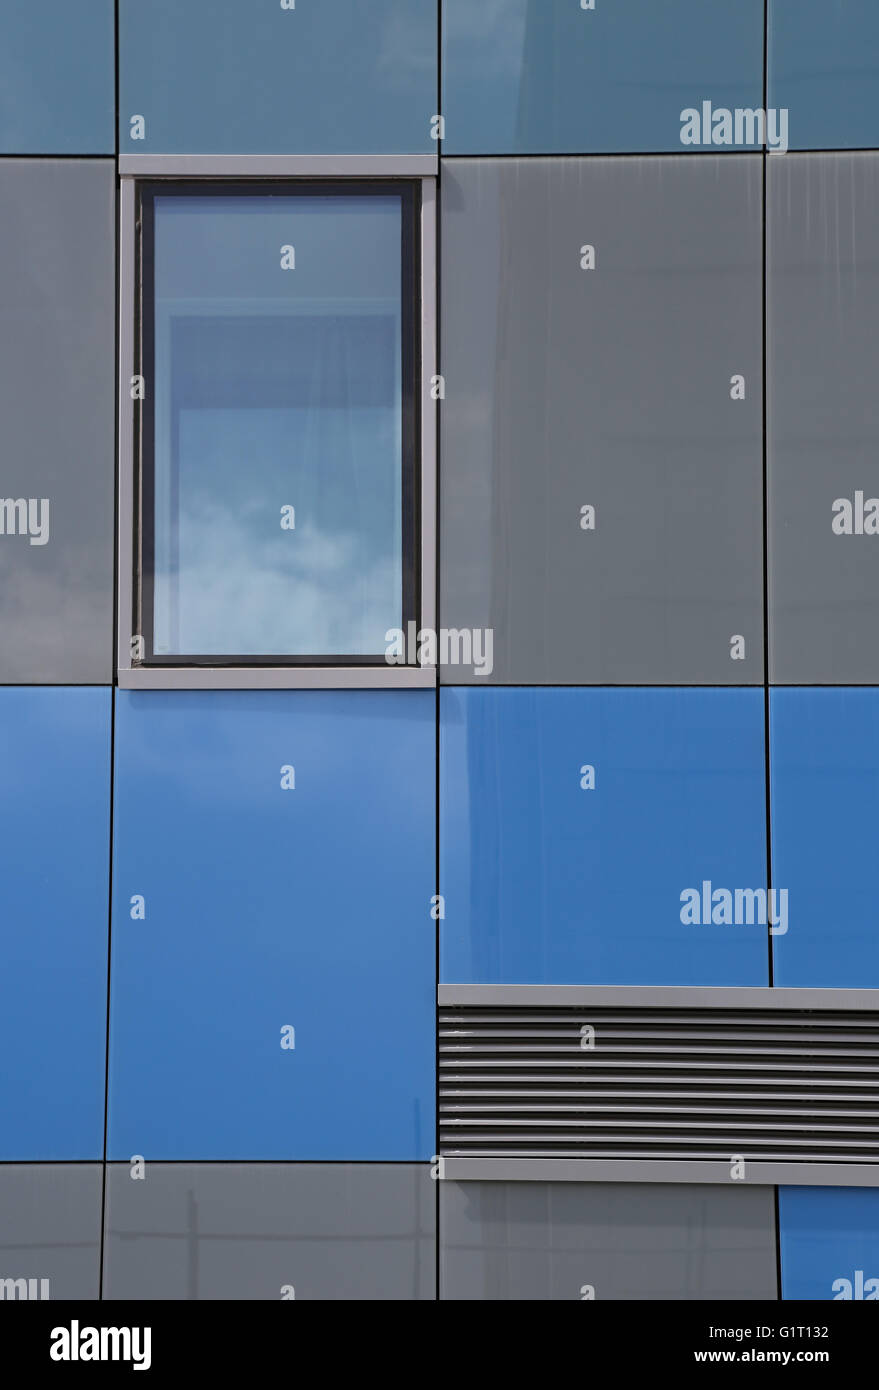 Cladding detail on the Premier Inn Hotel, Archway, London. A converted office block reclad in distinctive blue and grey panels Stock Photo